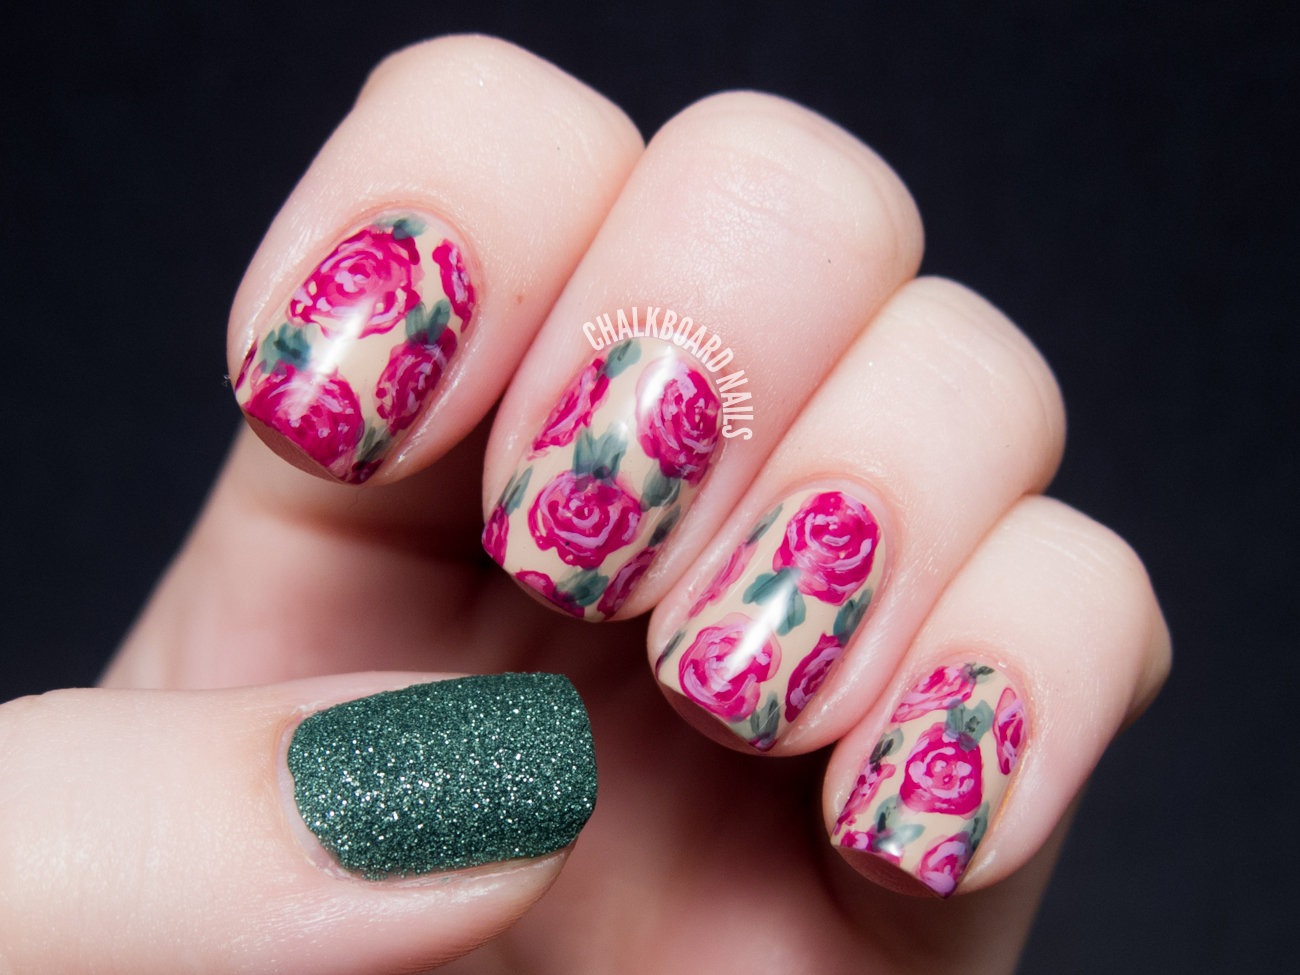 2. Rose Nail Art on French Tips - wide 3